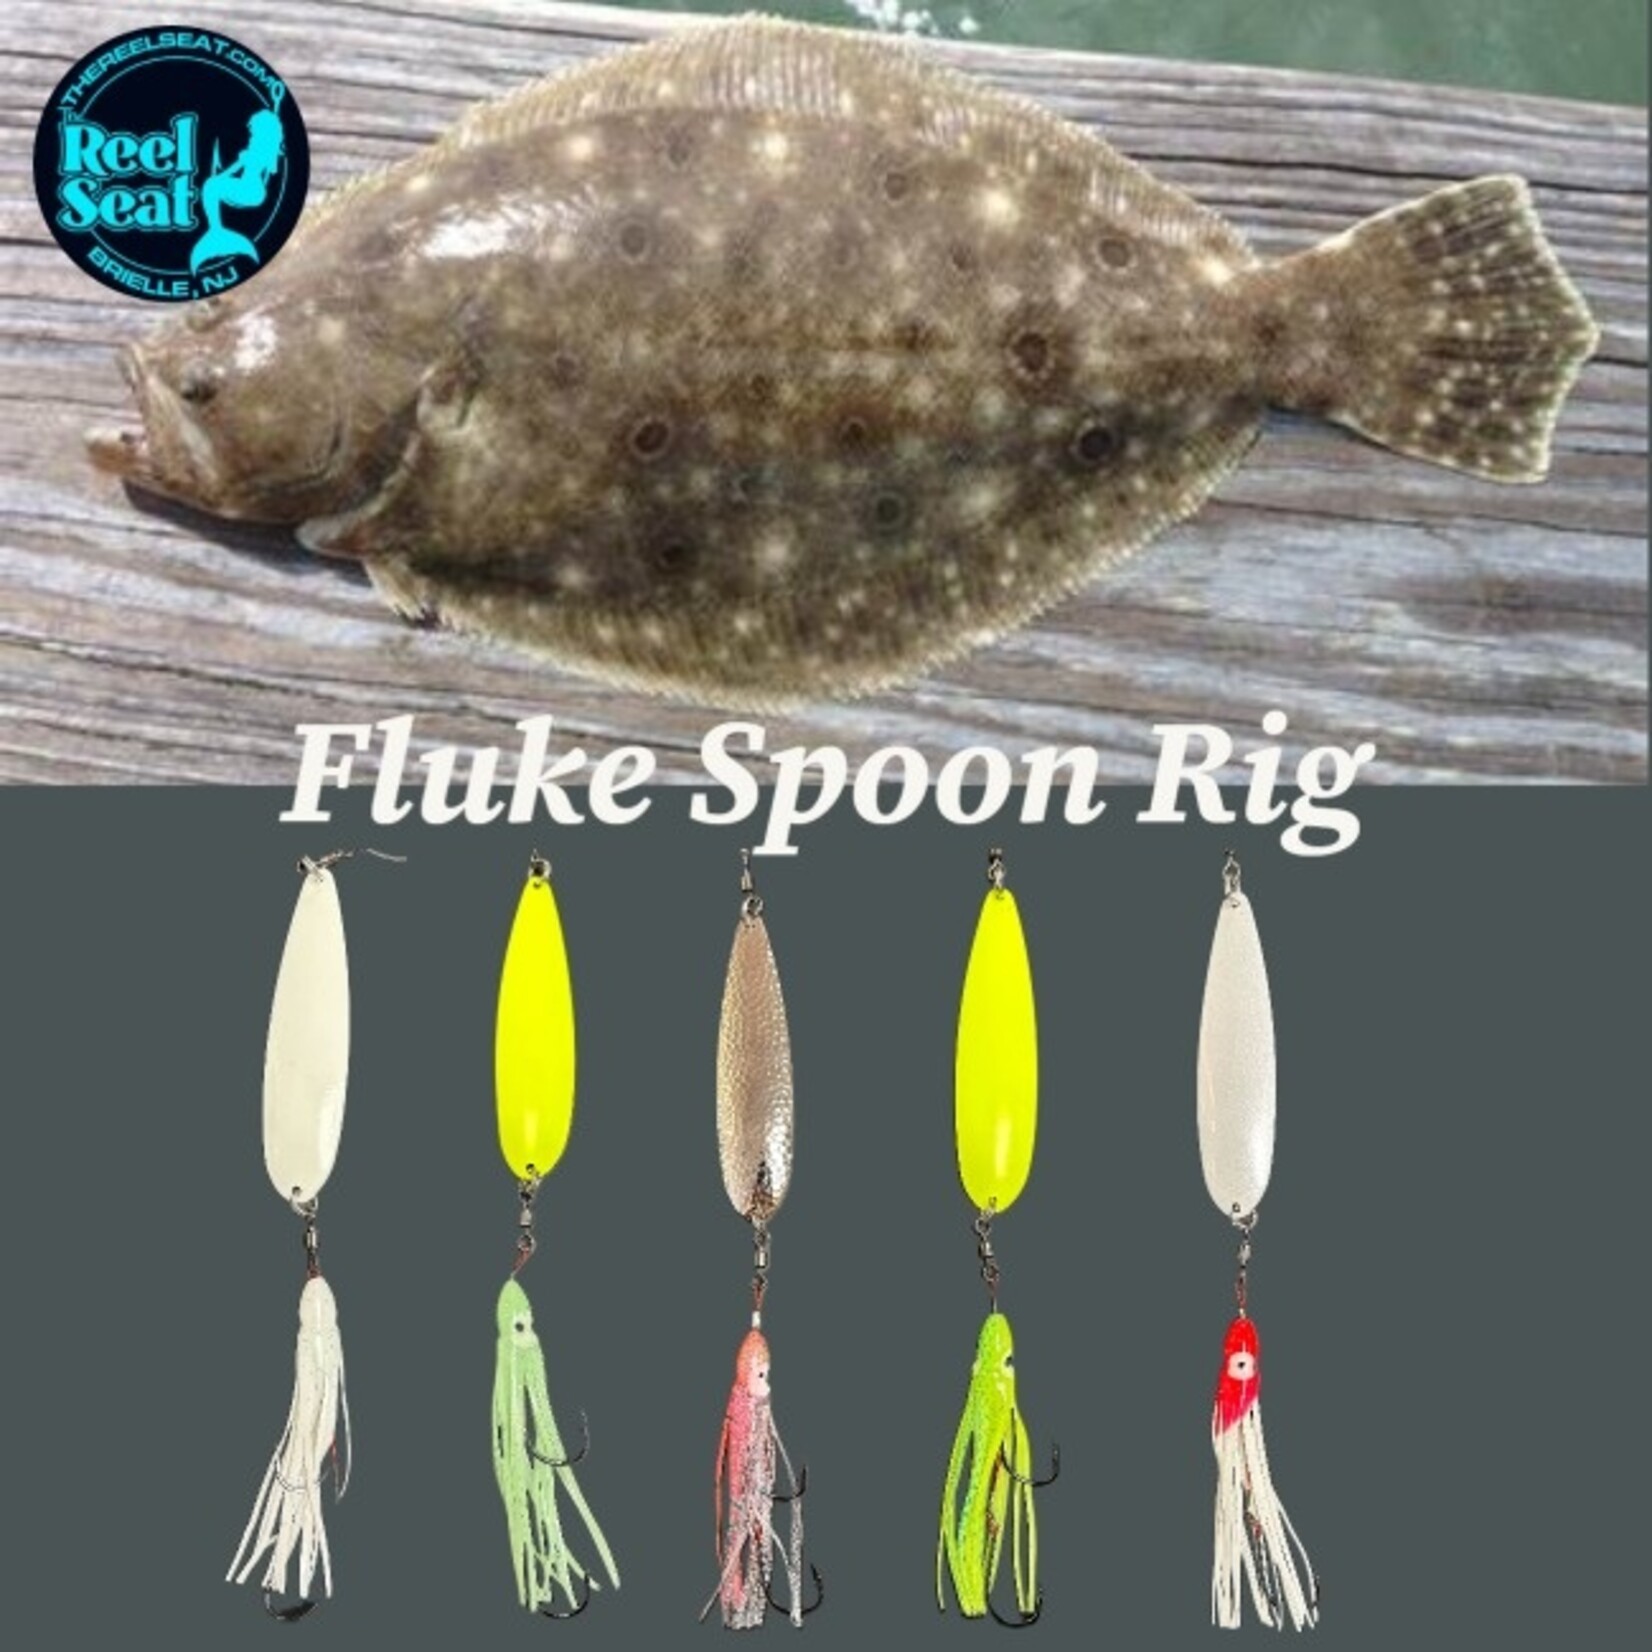 The Reel Seat RS Fluke Spoon Rig